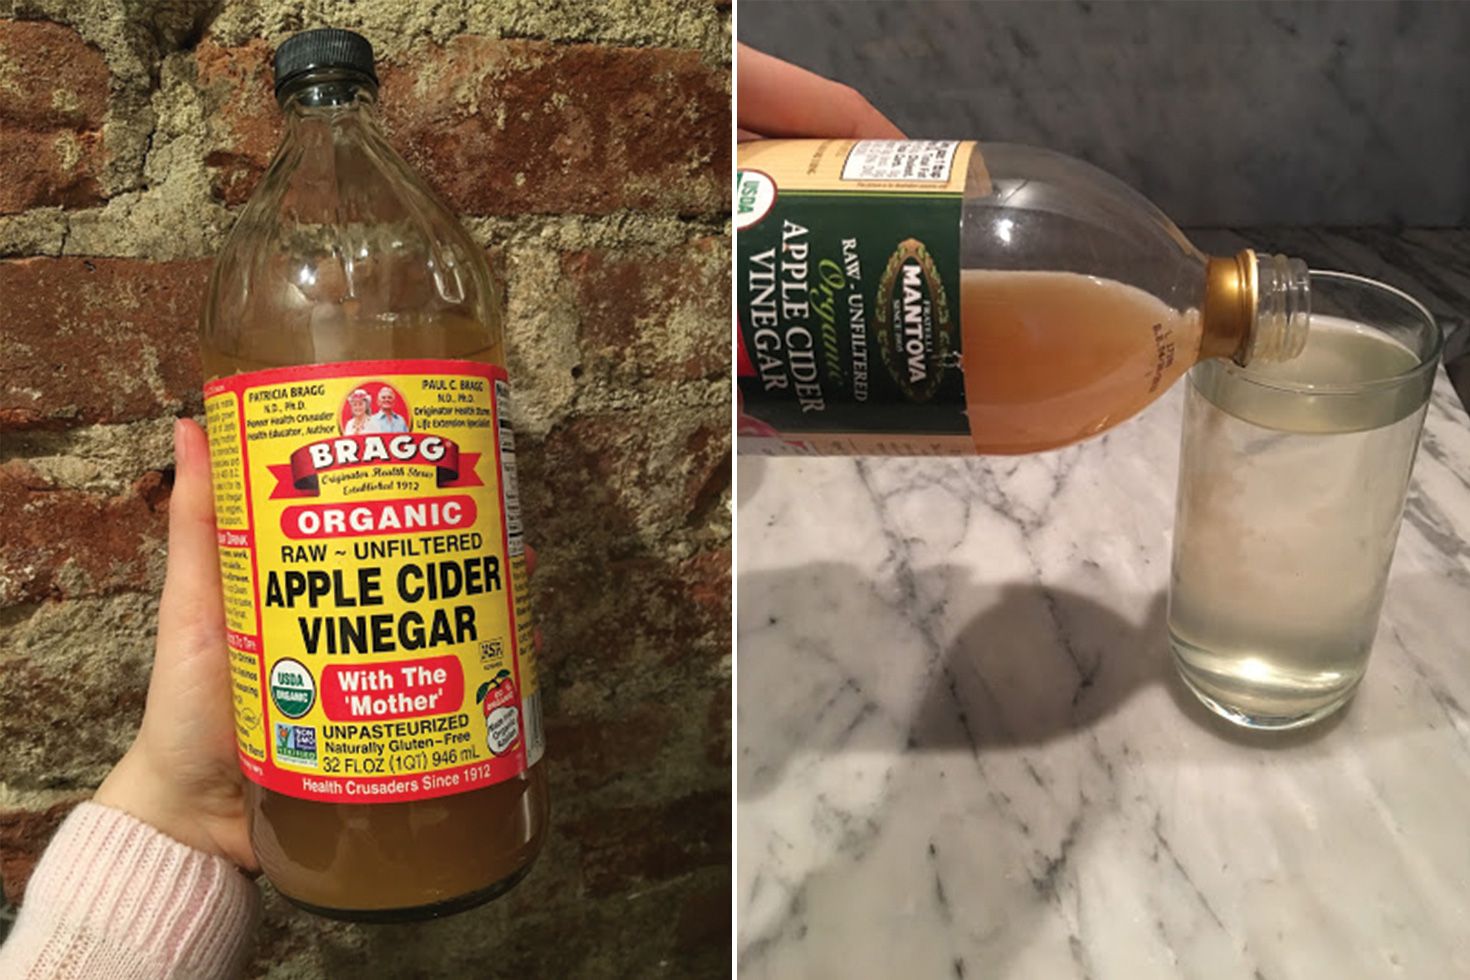 Apple cider vinegar for weight loss: Does it really work